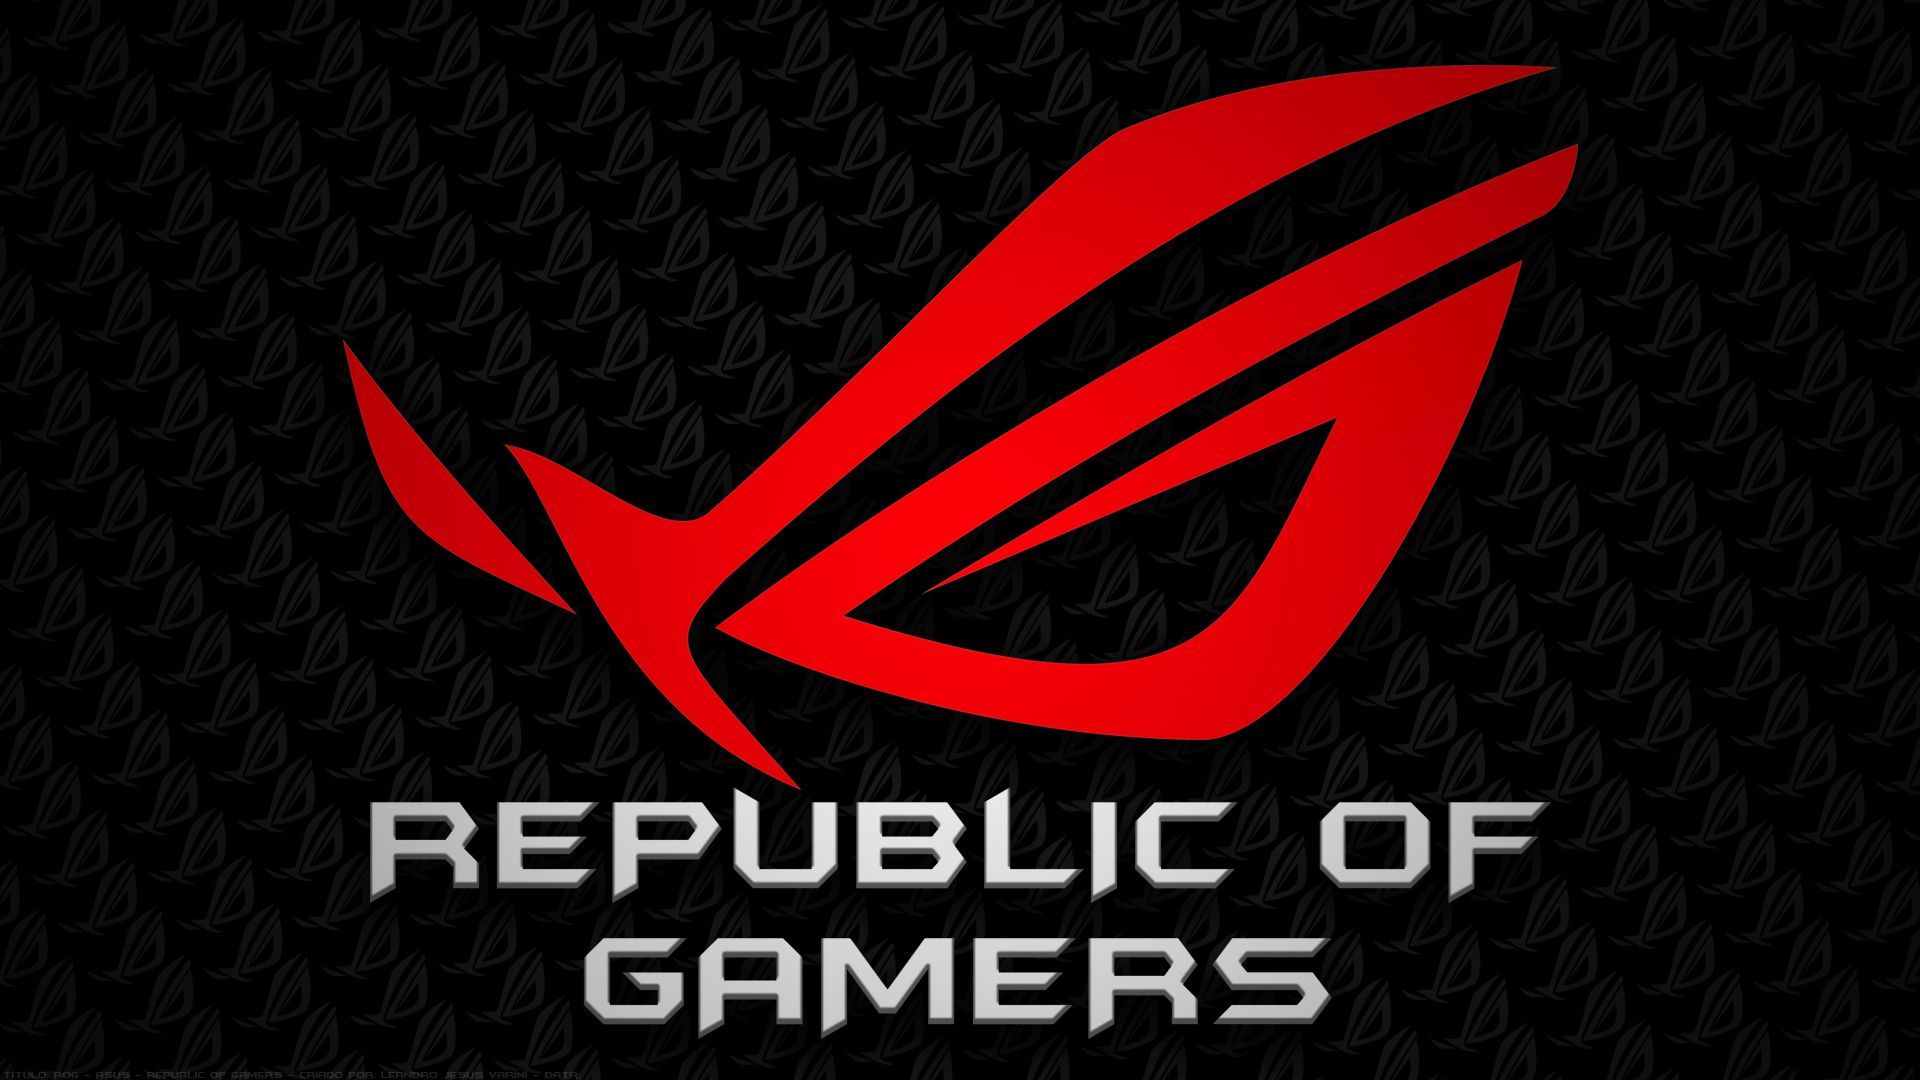 Wallpaper Competition: Vote For Your Favorite - Republic of Gamers ...